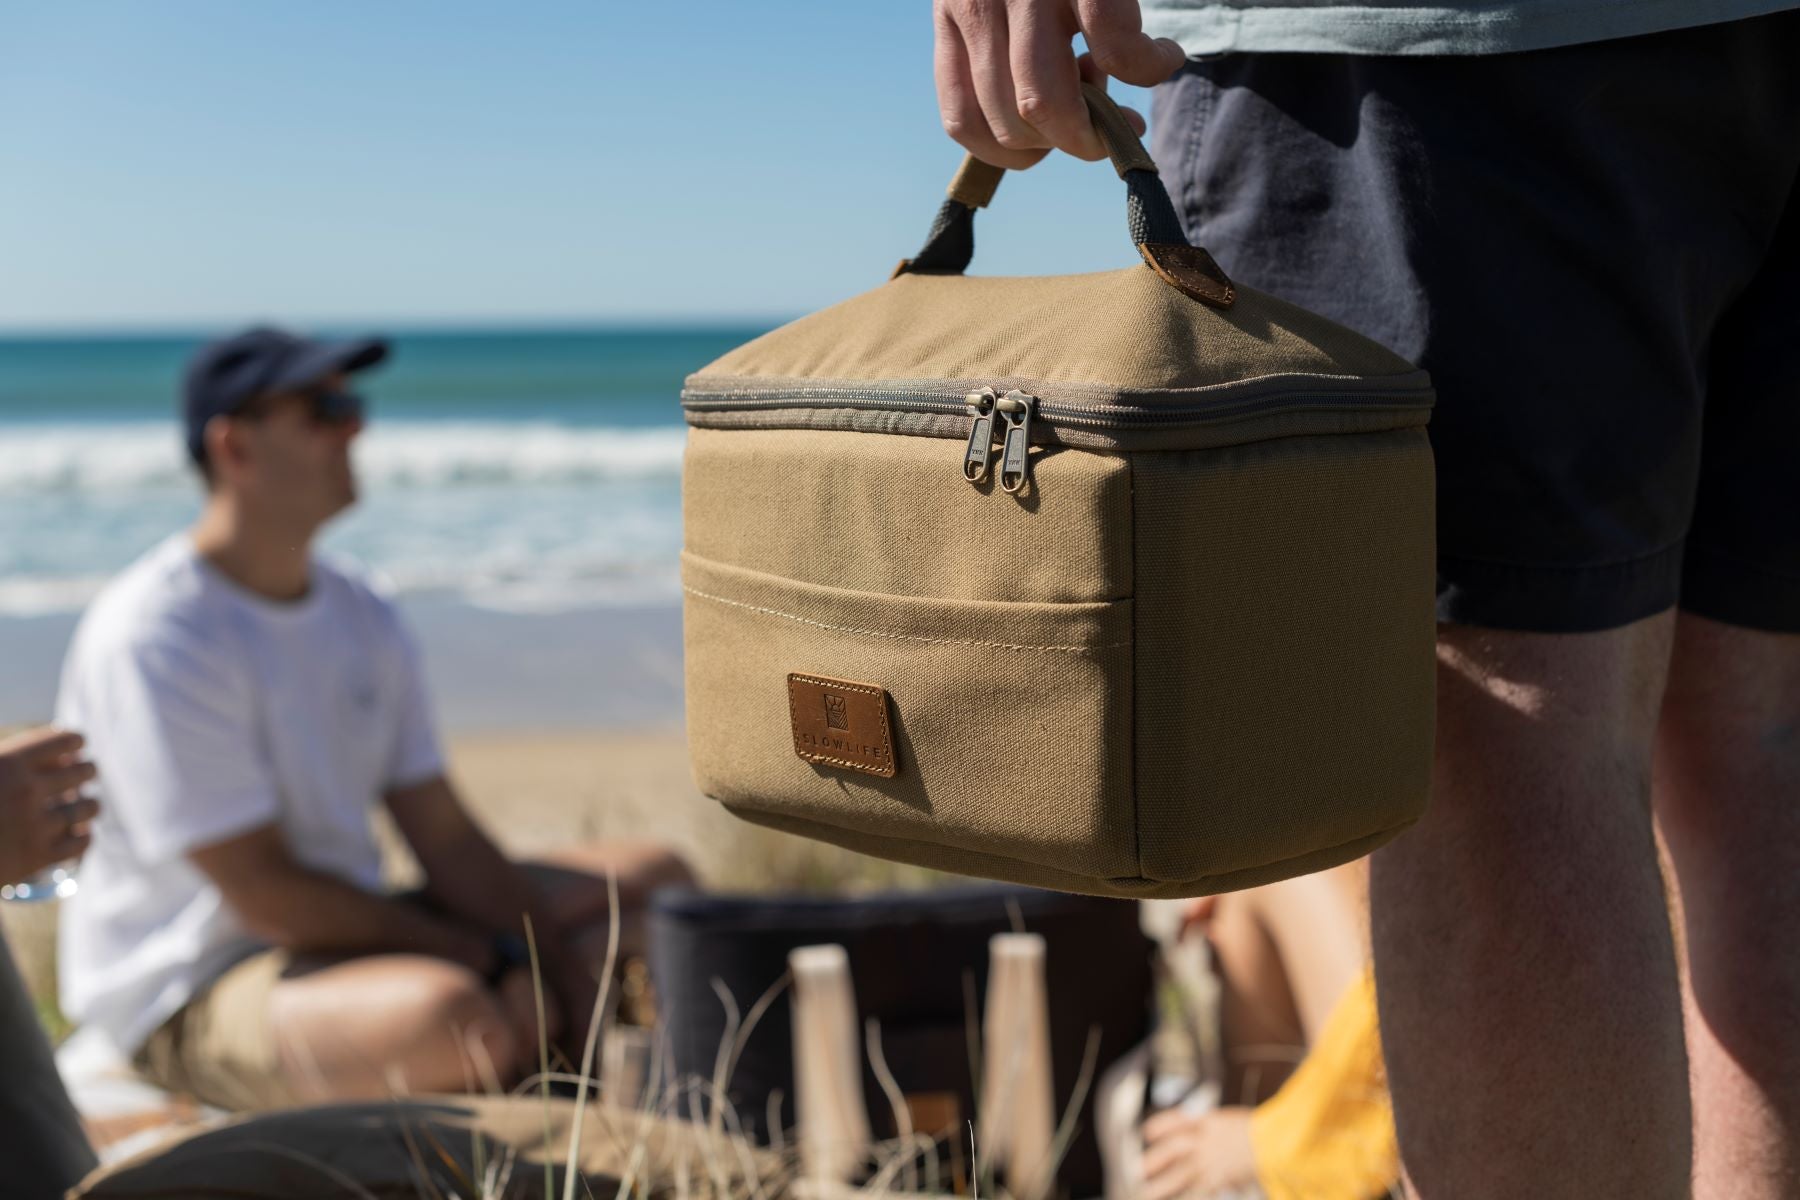 The Olive Slowlife Collection Lunch bag. Being held by the handle and taken at the beach. 